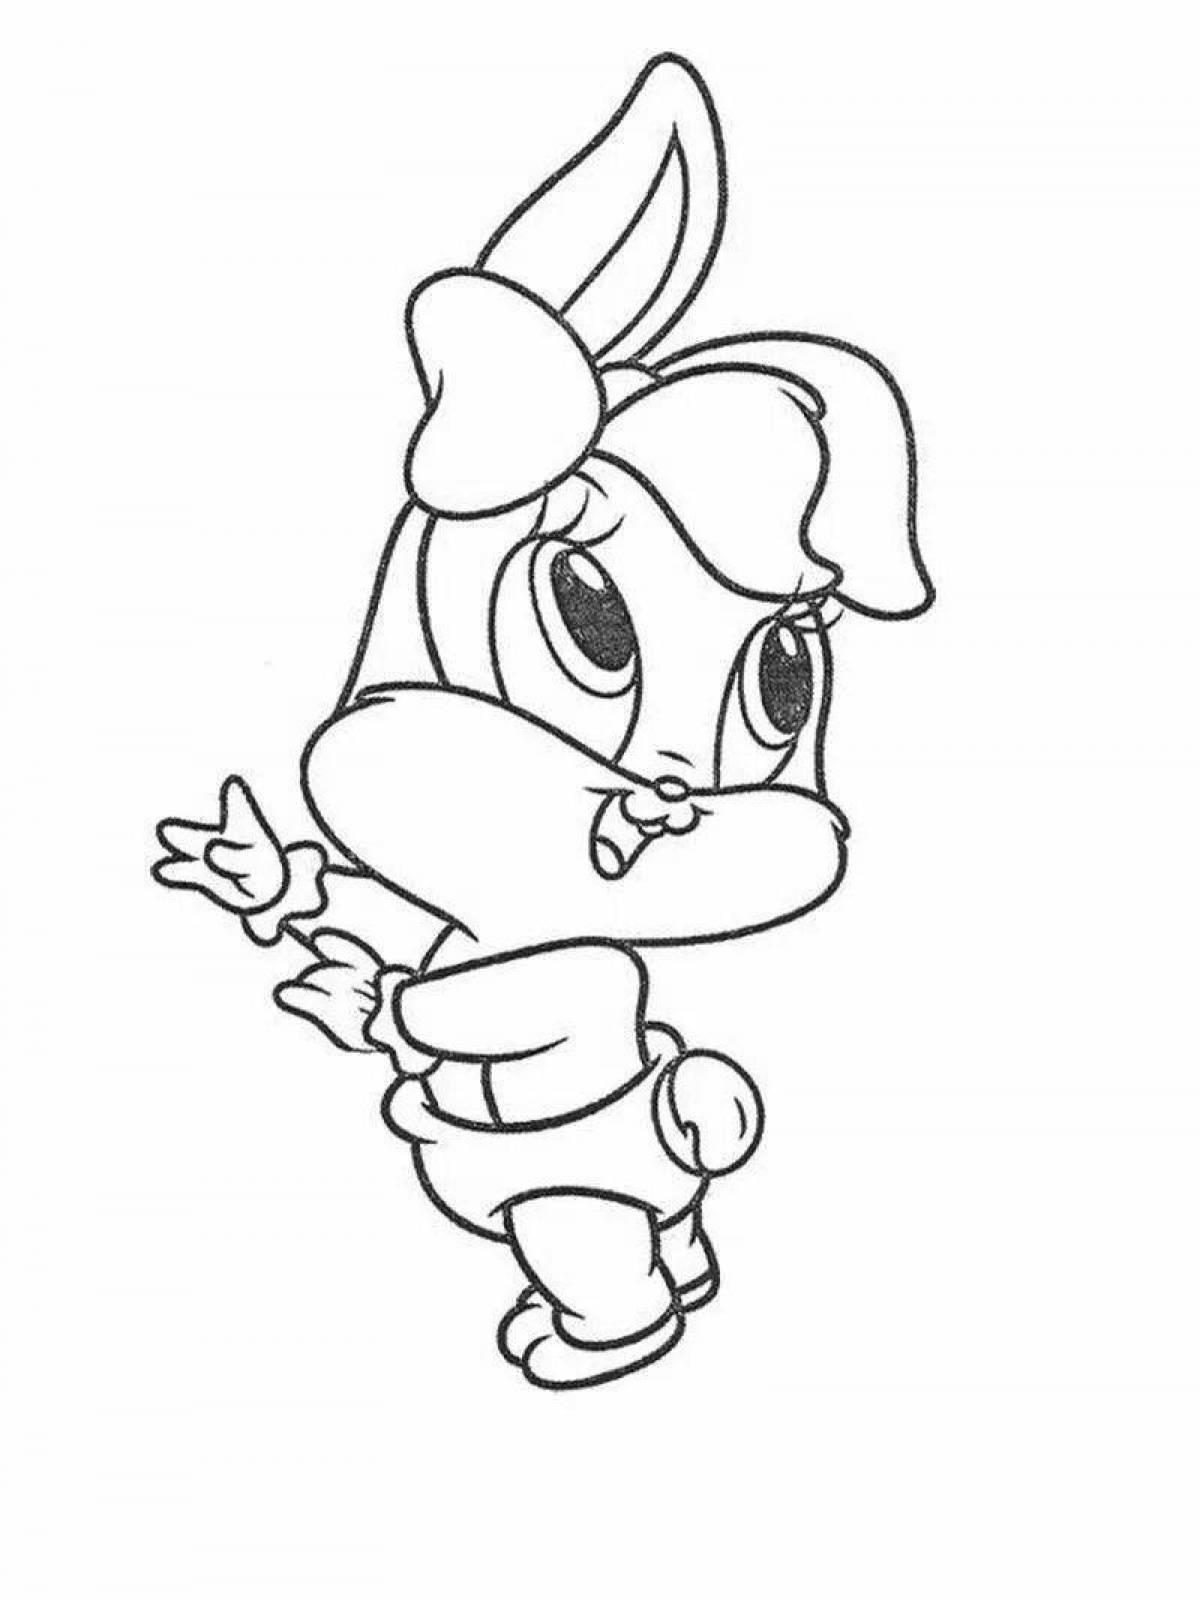 Fluffy bunny coloring book with a bow